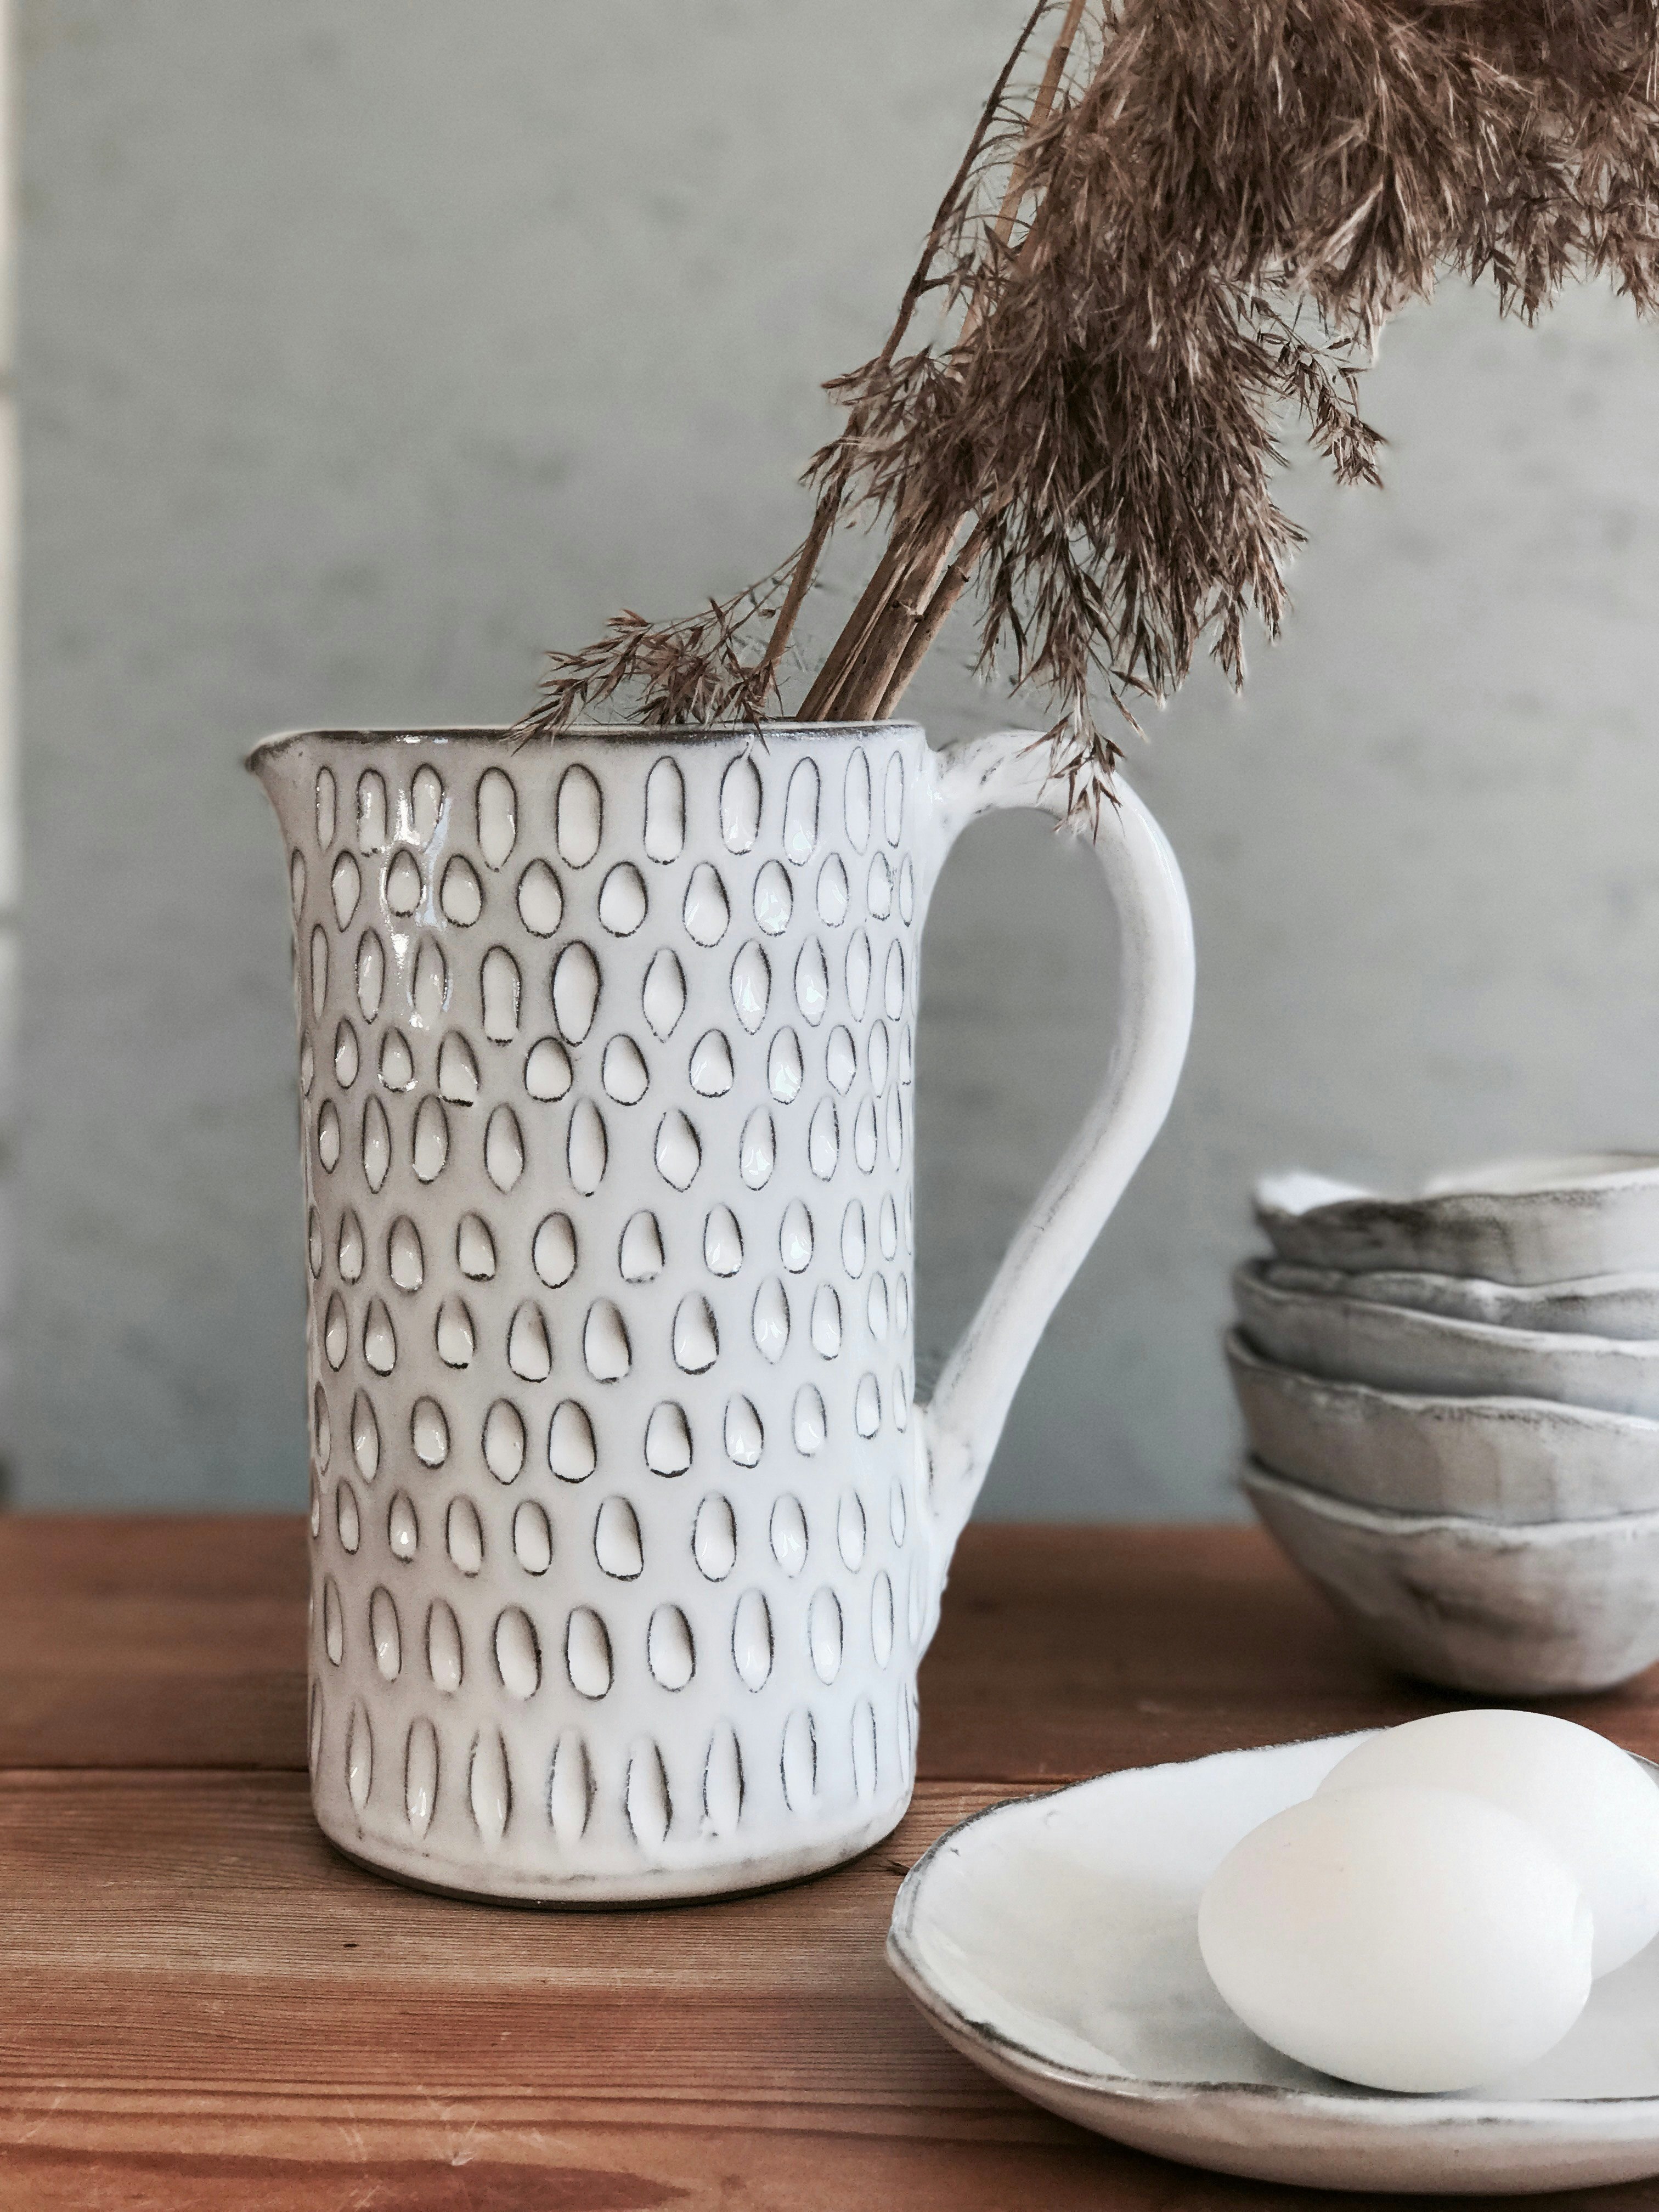 CERAMIC PITCHER IN GRAY CLAY